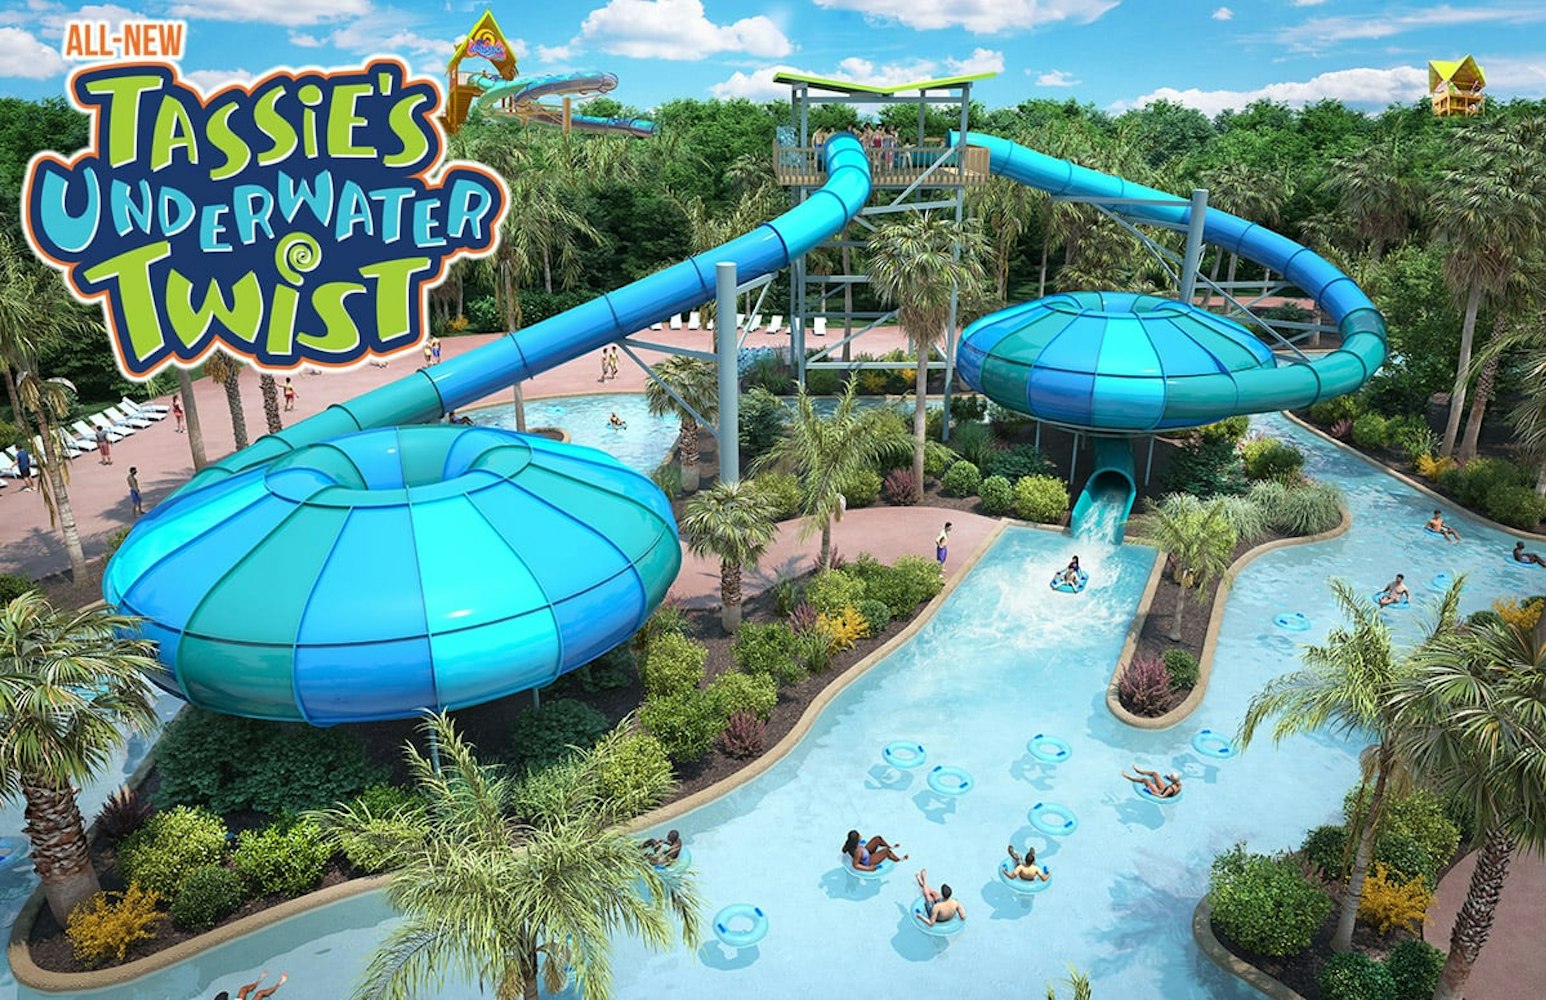 Cover Image for Aquatica Brings Florida's Most Immersive Water Slide to Orlando